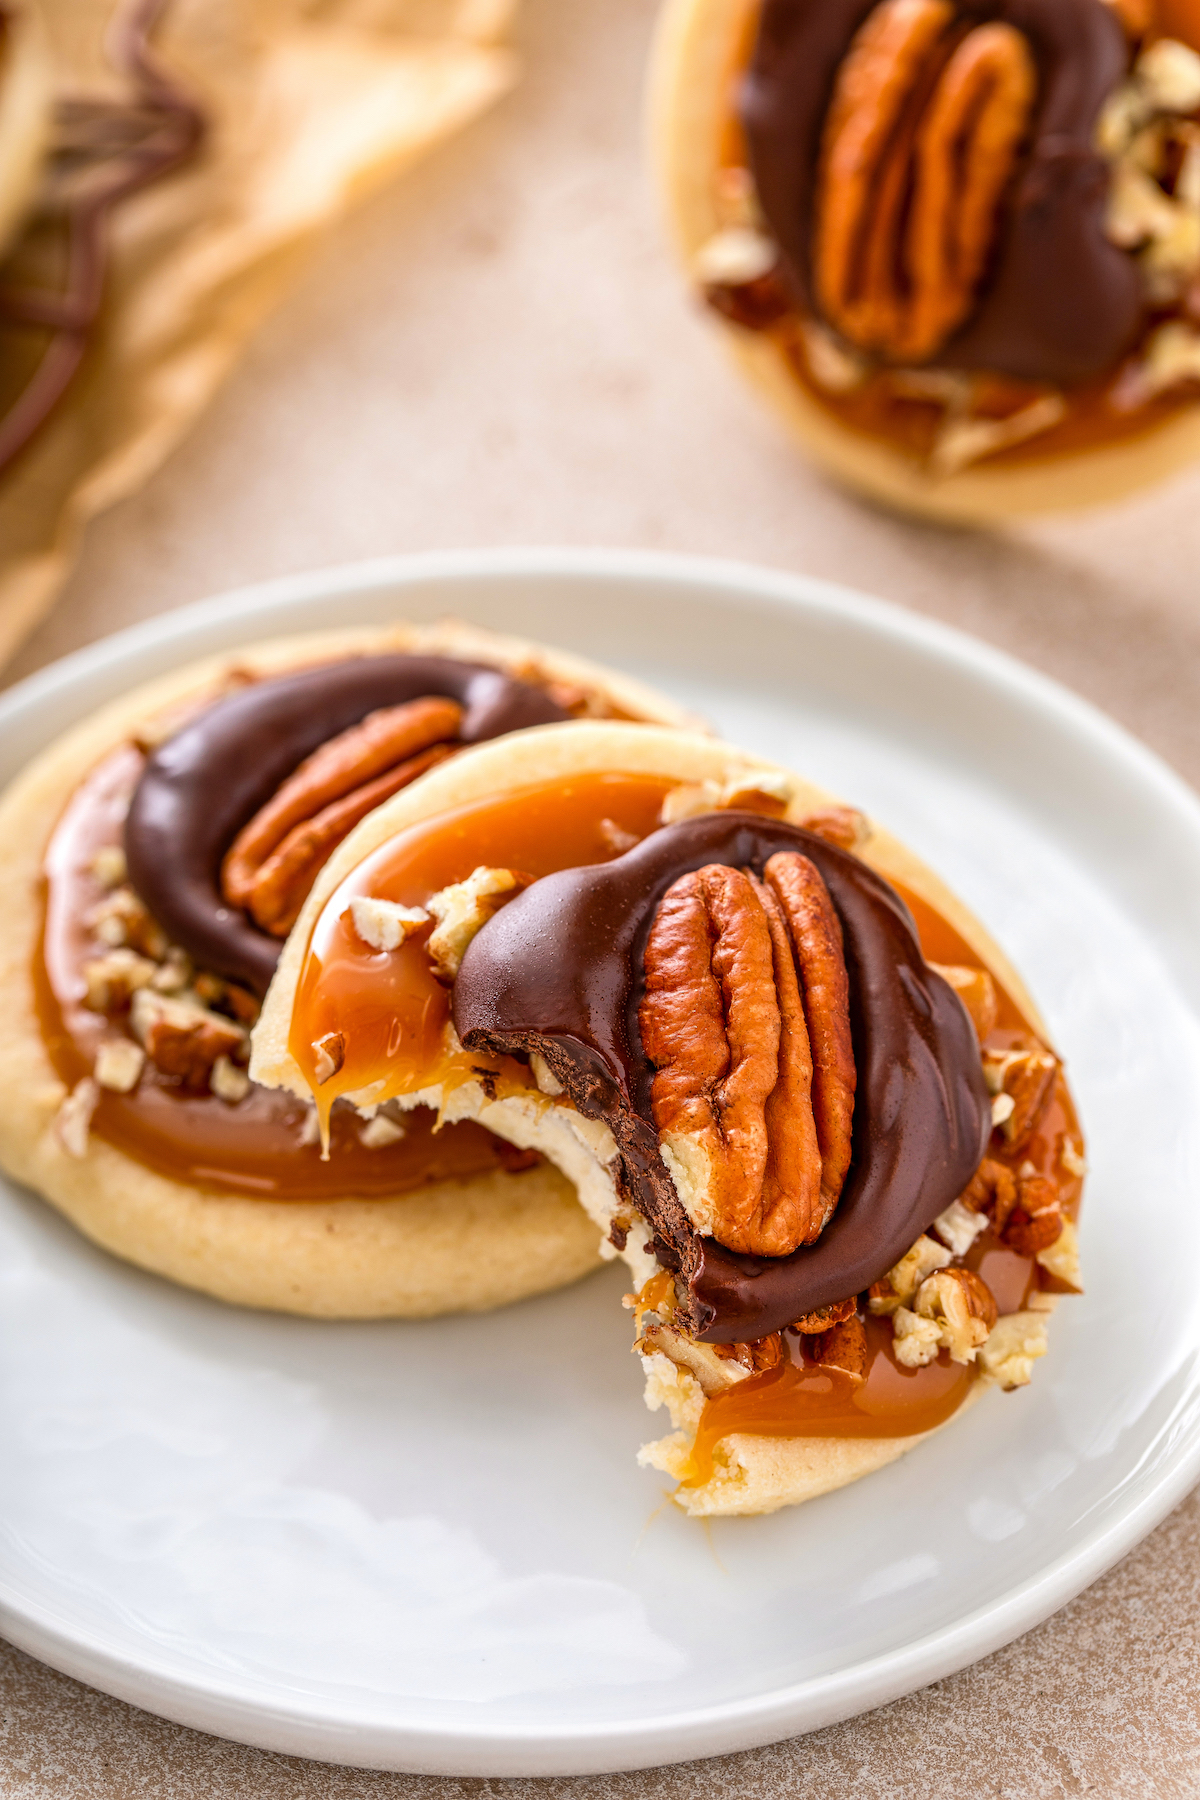 A bite taken out of a soft sugar cookie topped with caramel, pecans and chocolate on a plate.